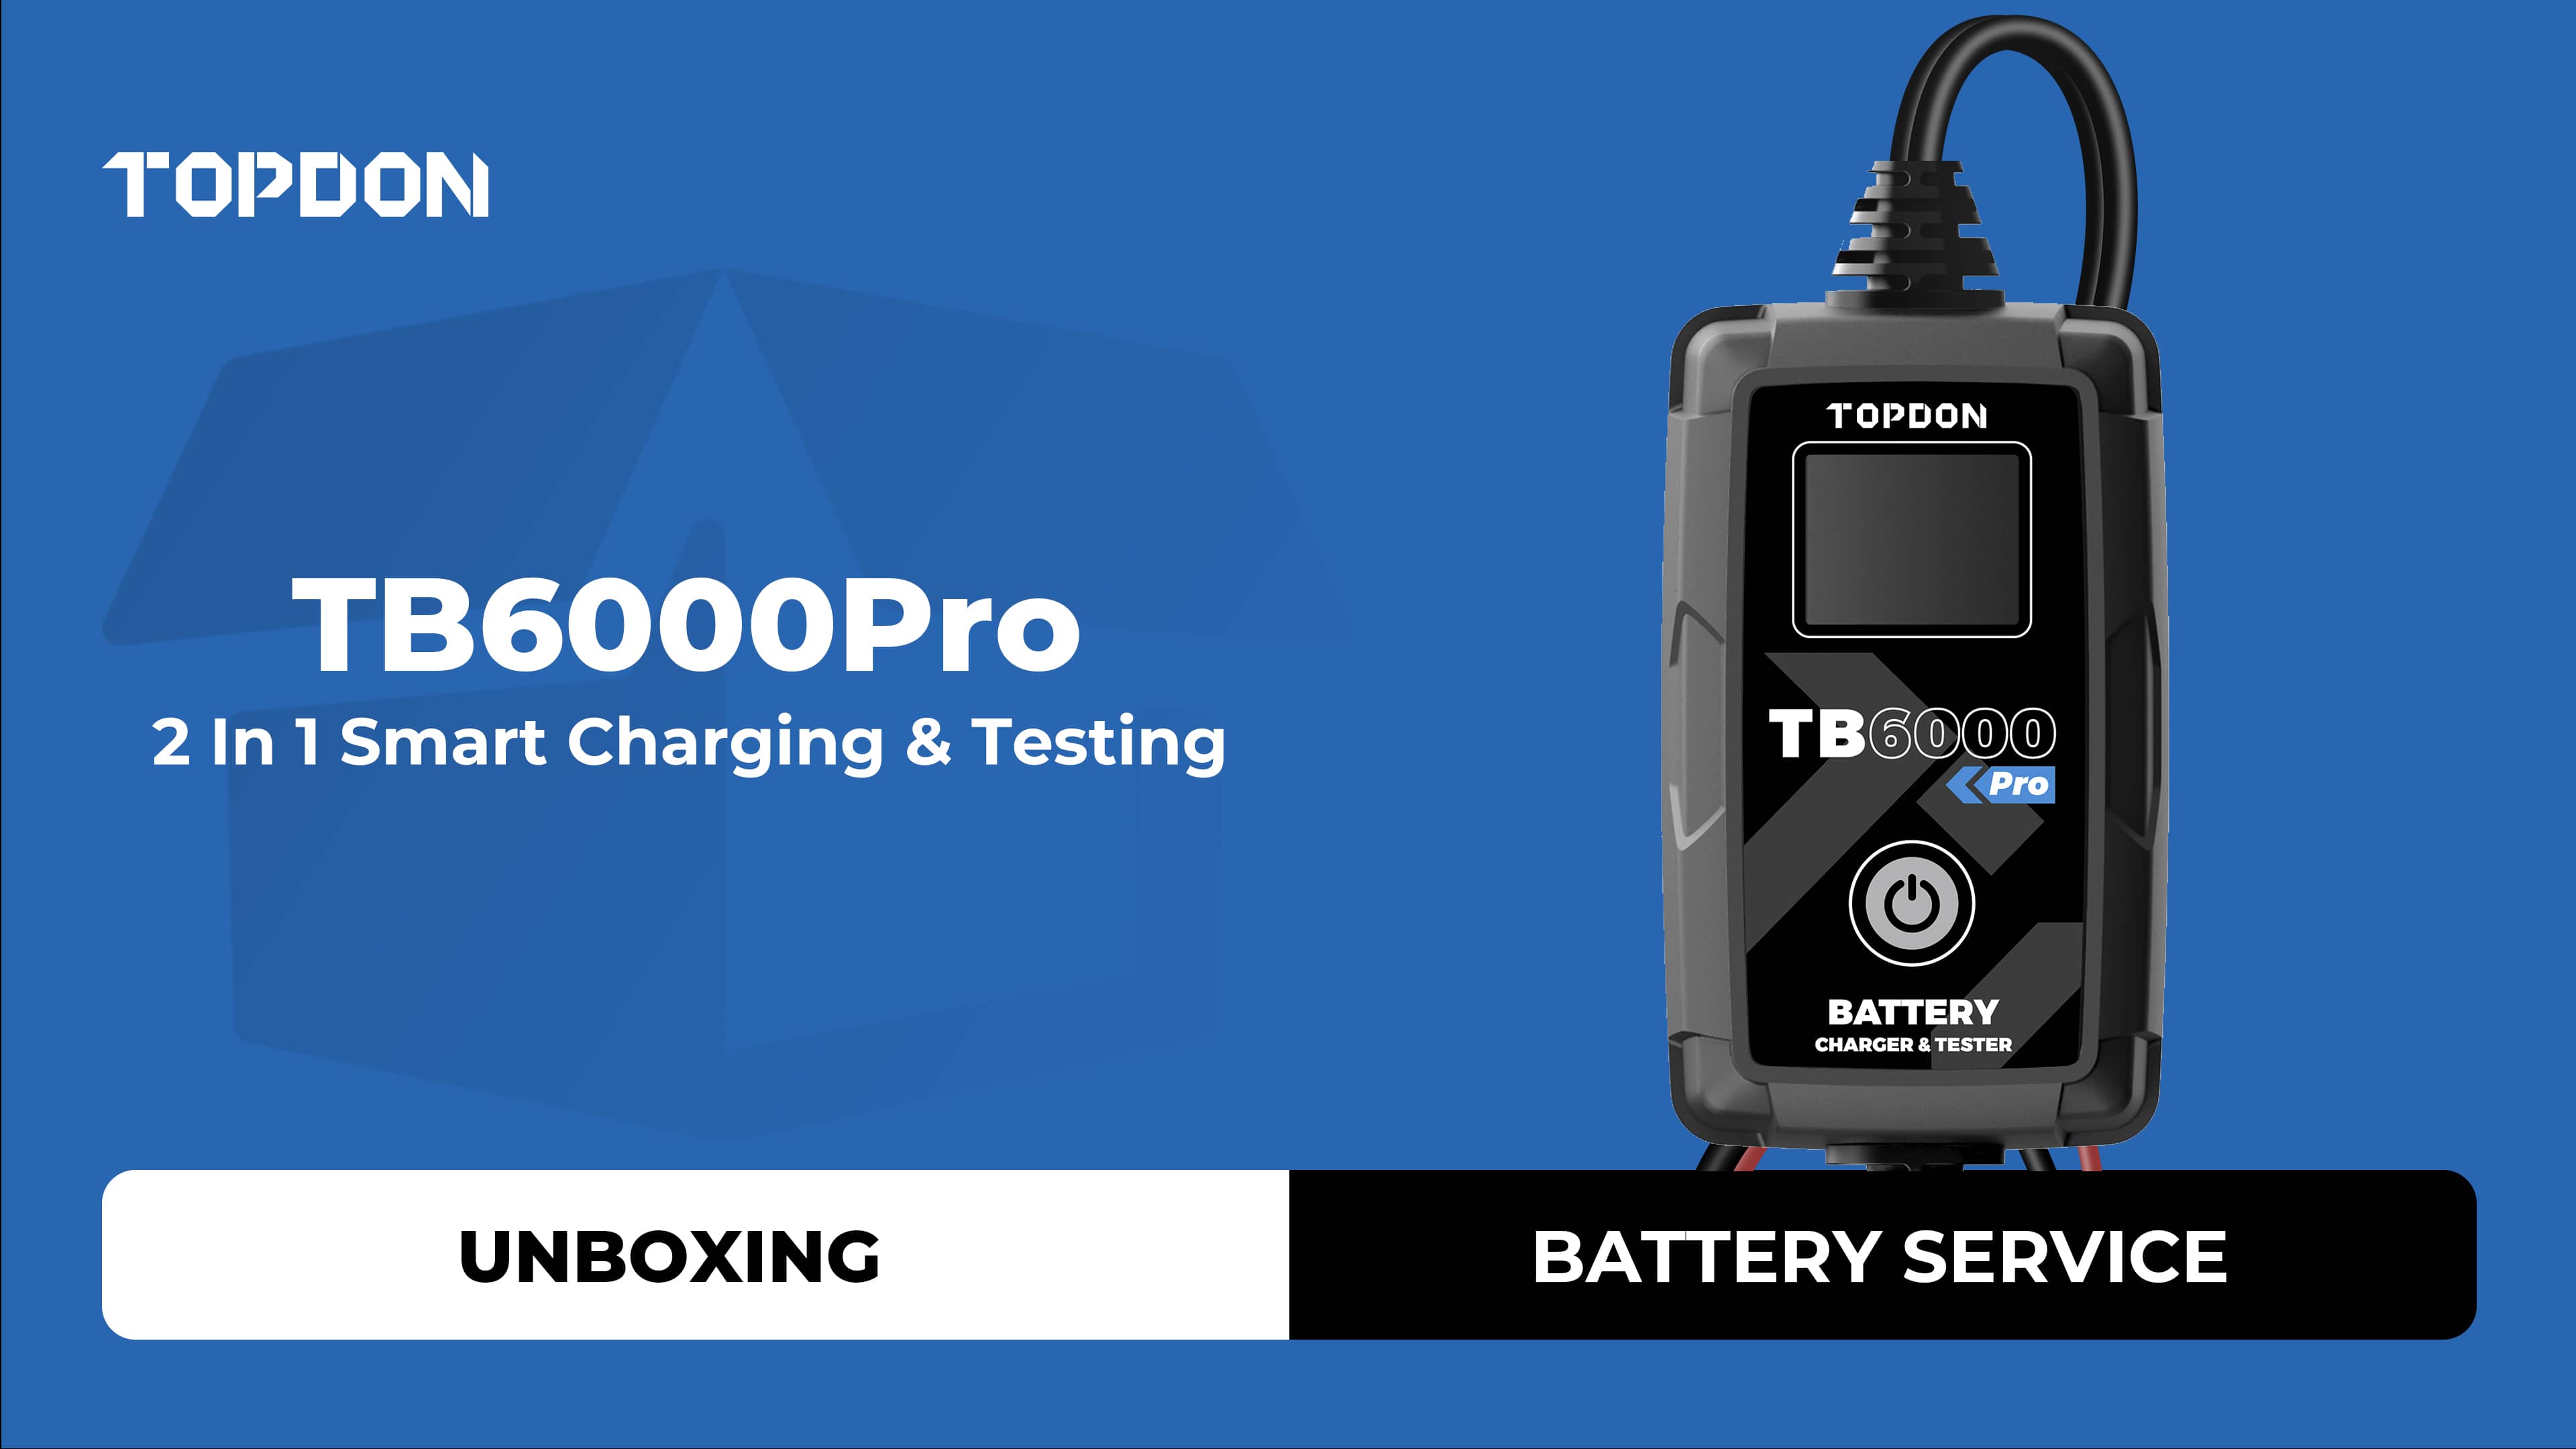 TOPDON TB6000Pro | Unboxing | 2 In 1 Battery Charger and Tester